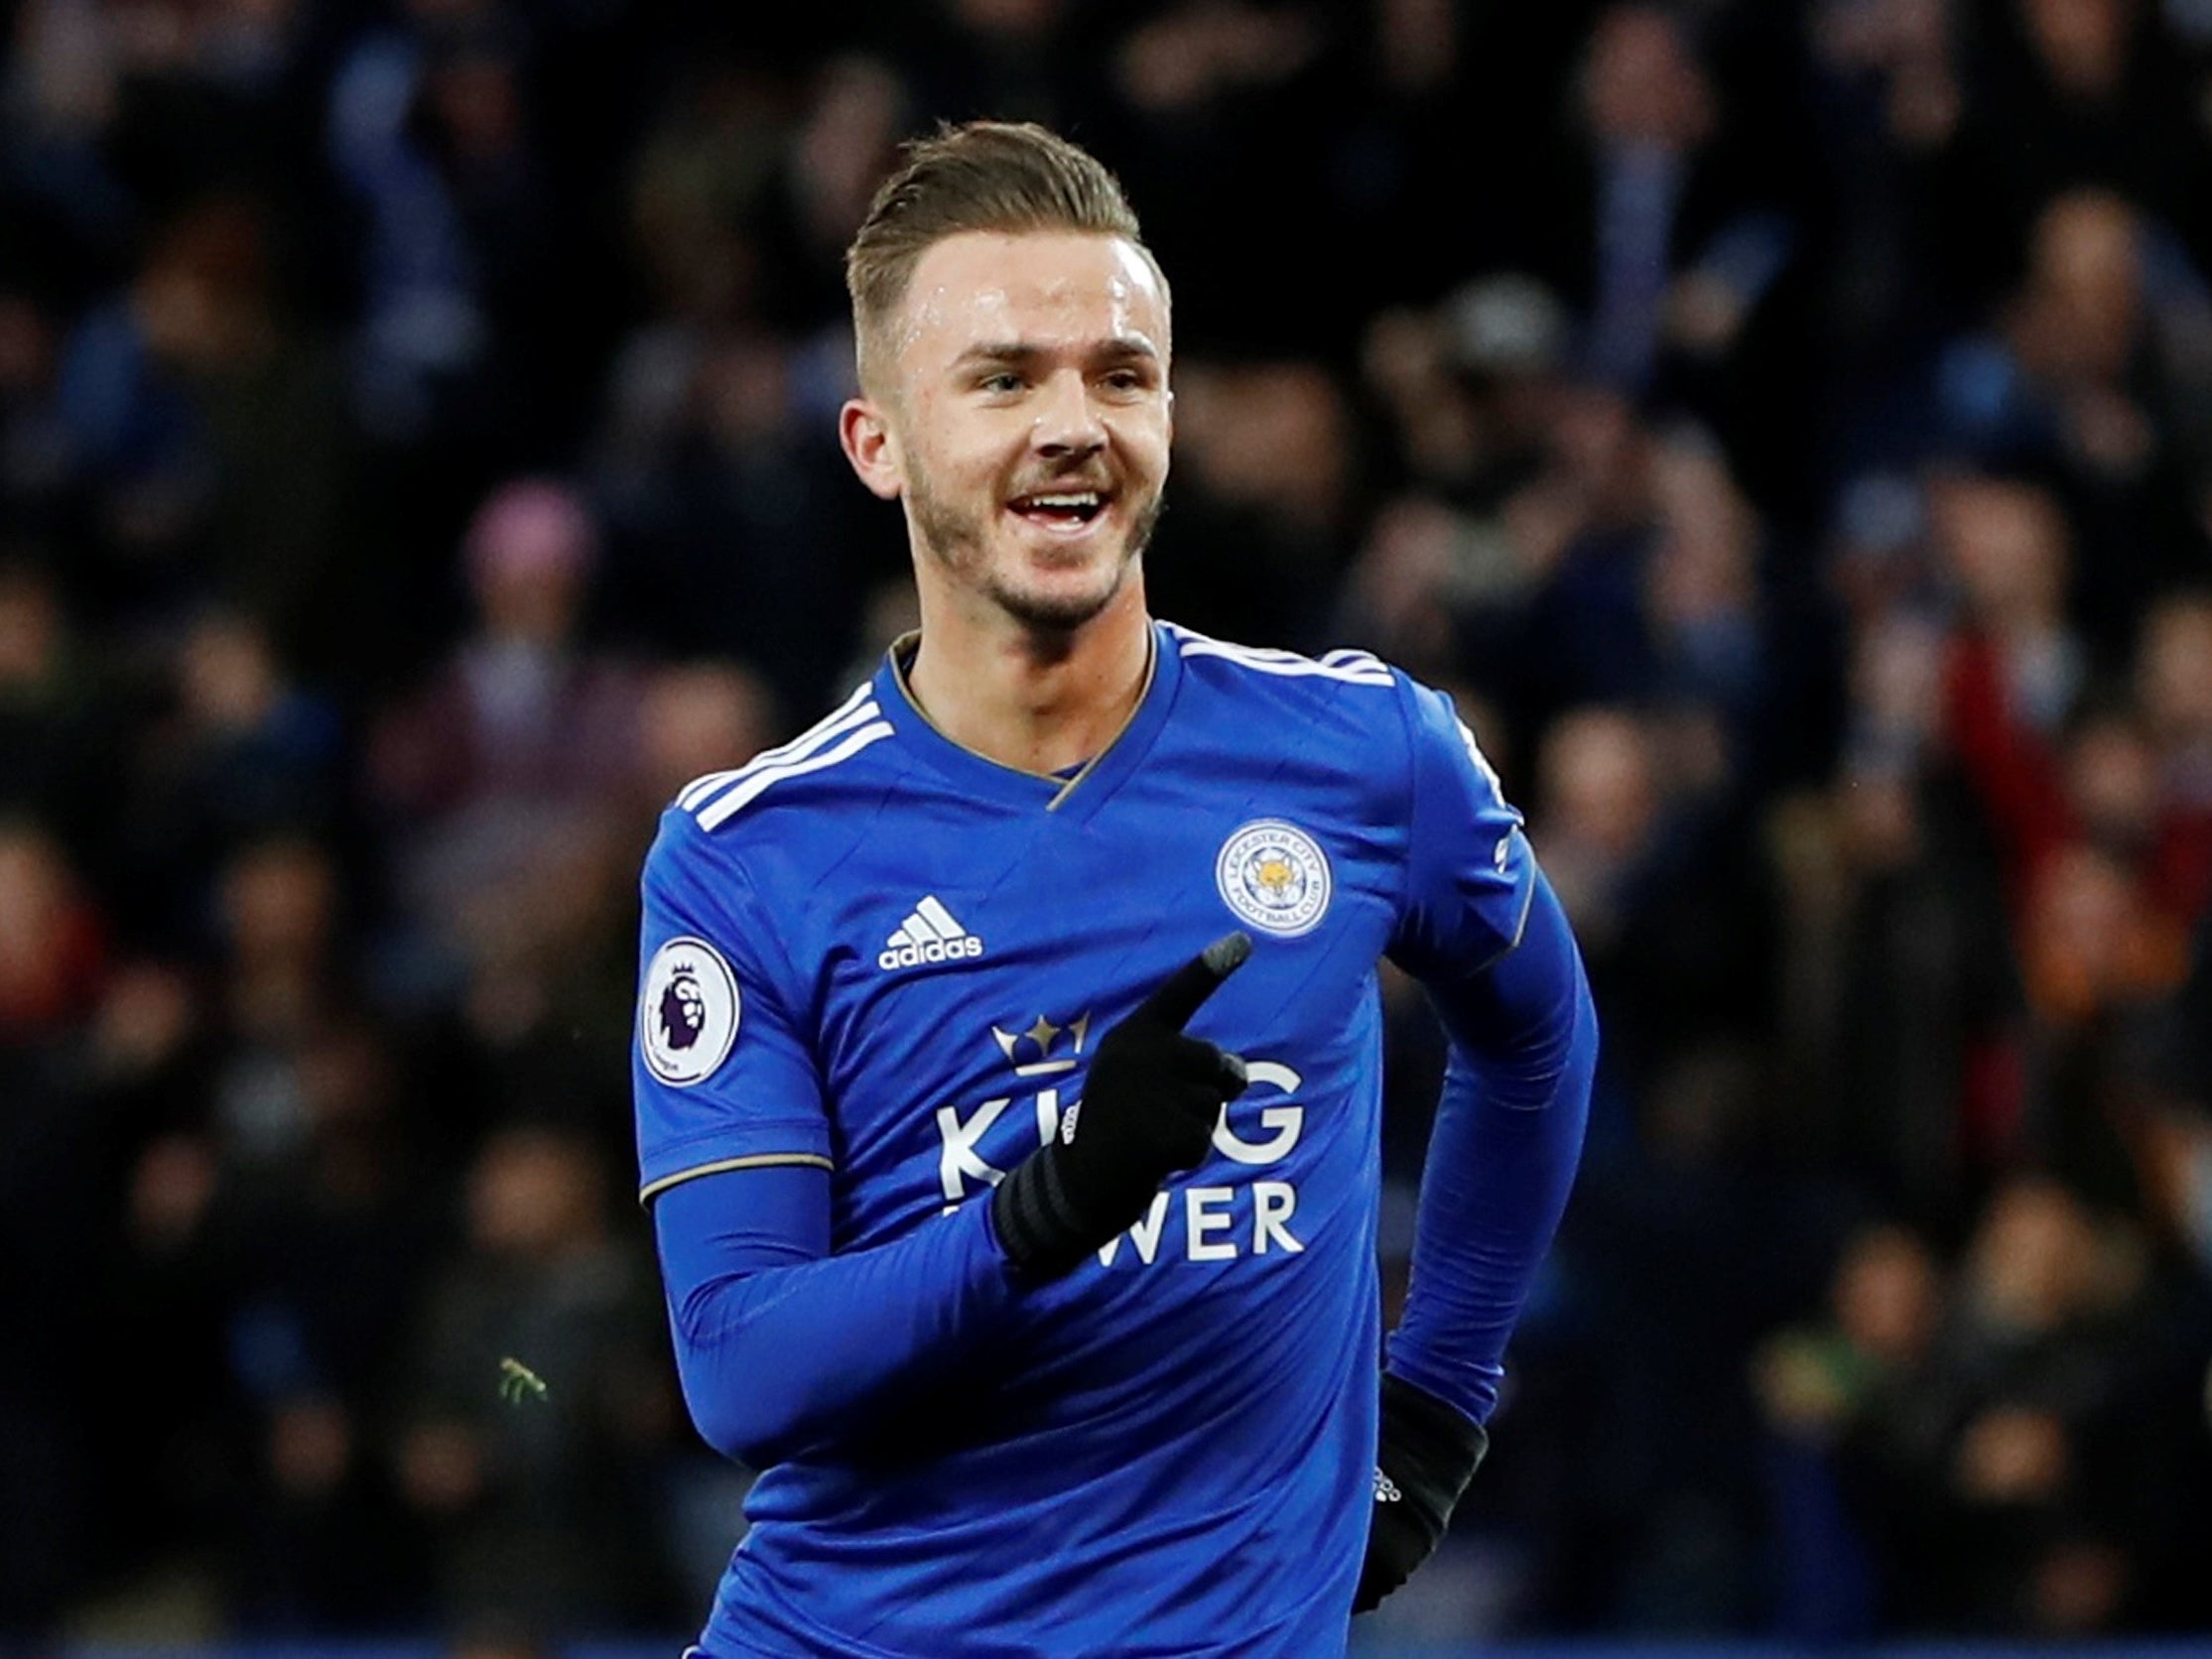 James Maddison has been in top form for Leicester this season